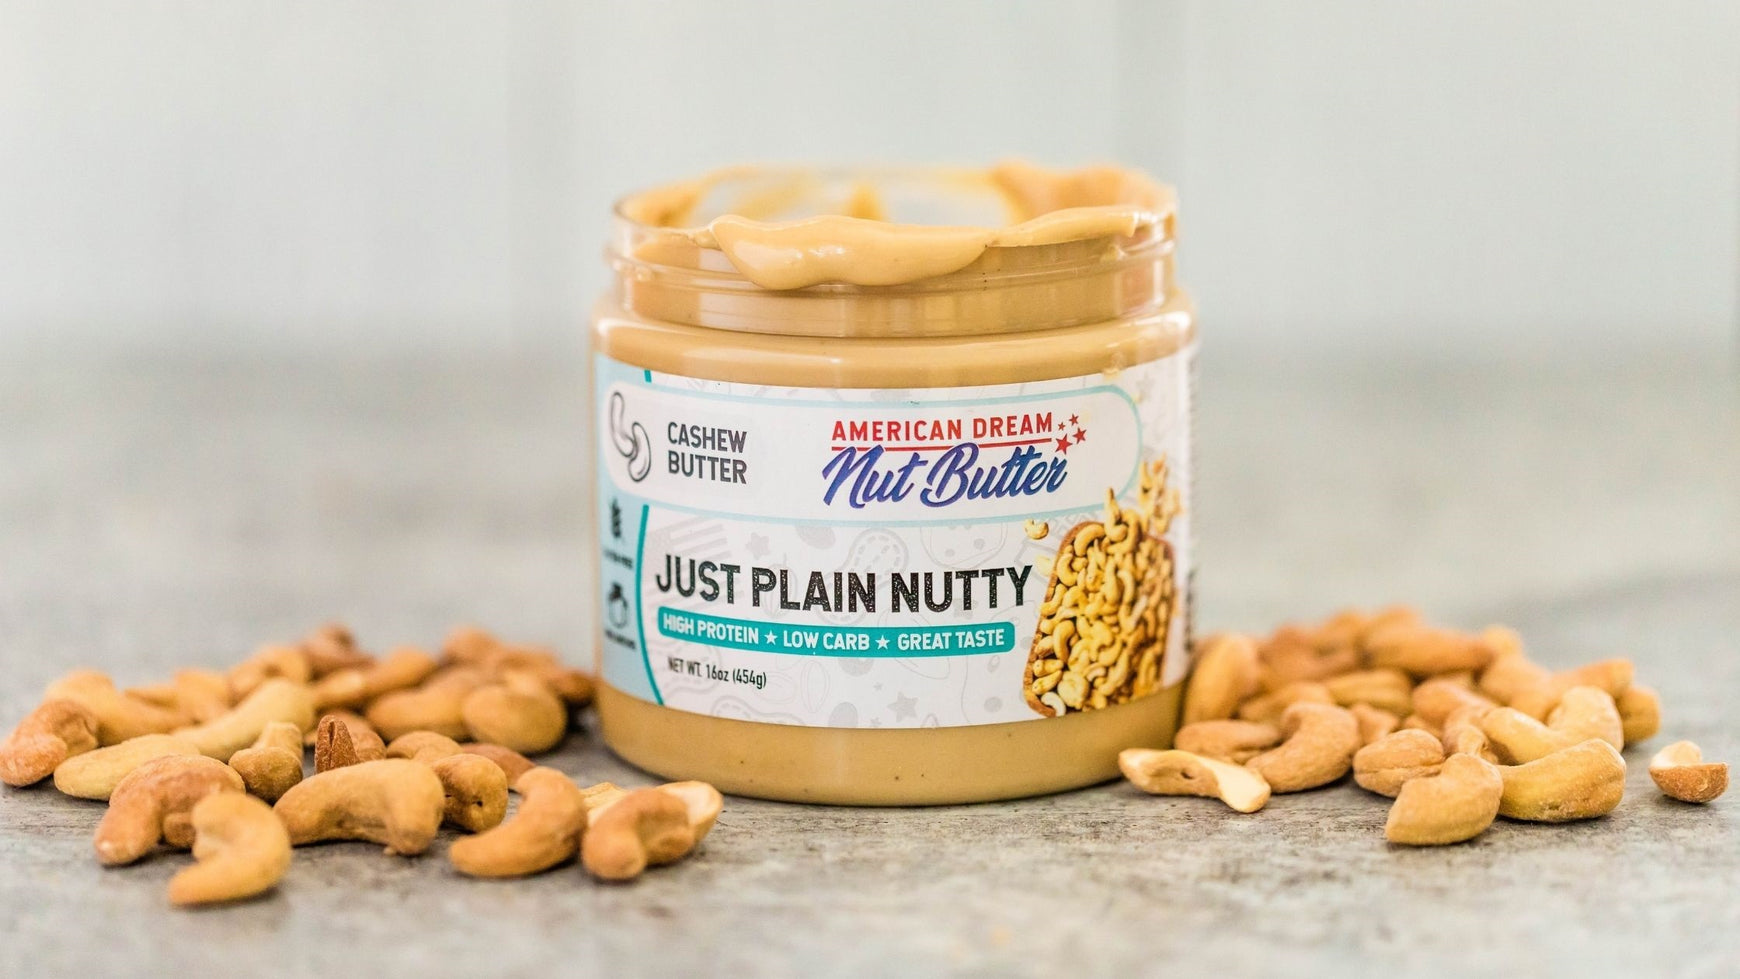 How We Developed Our Specialty Cashew Butter